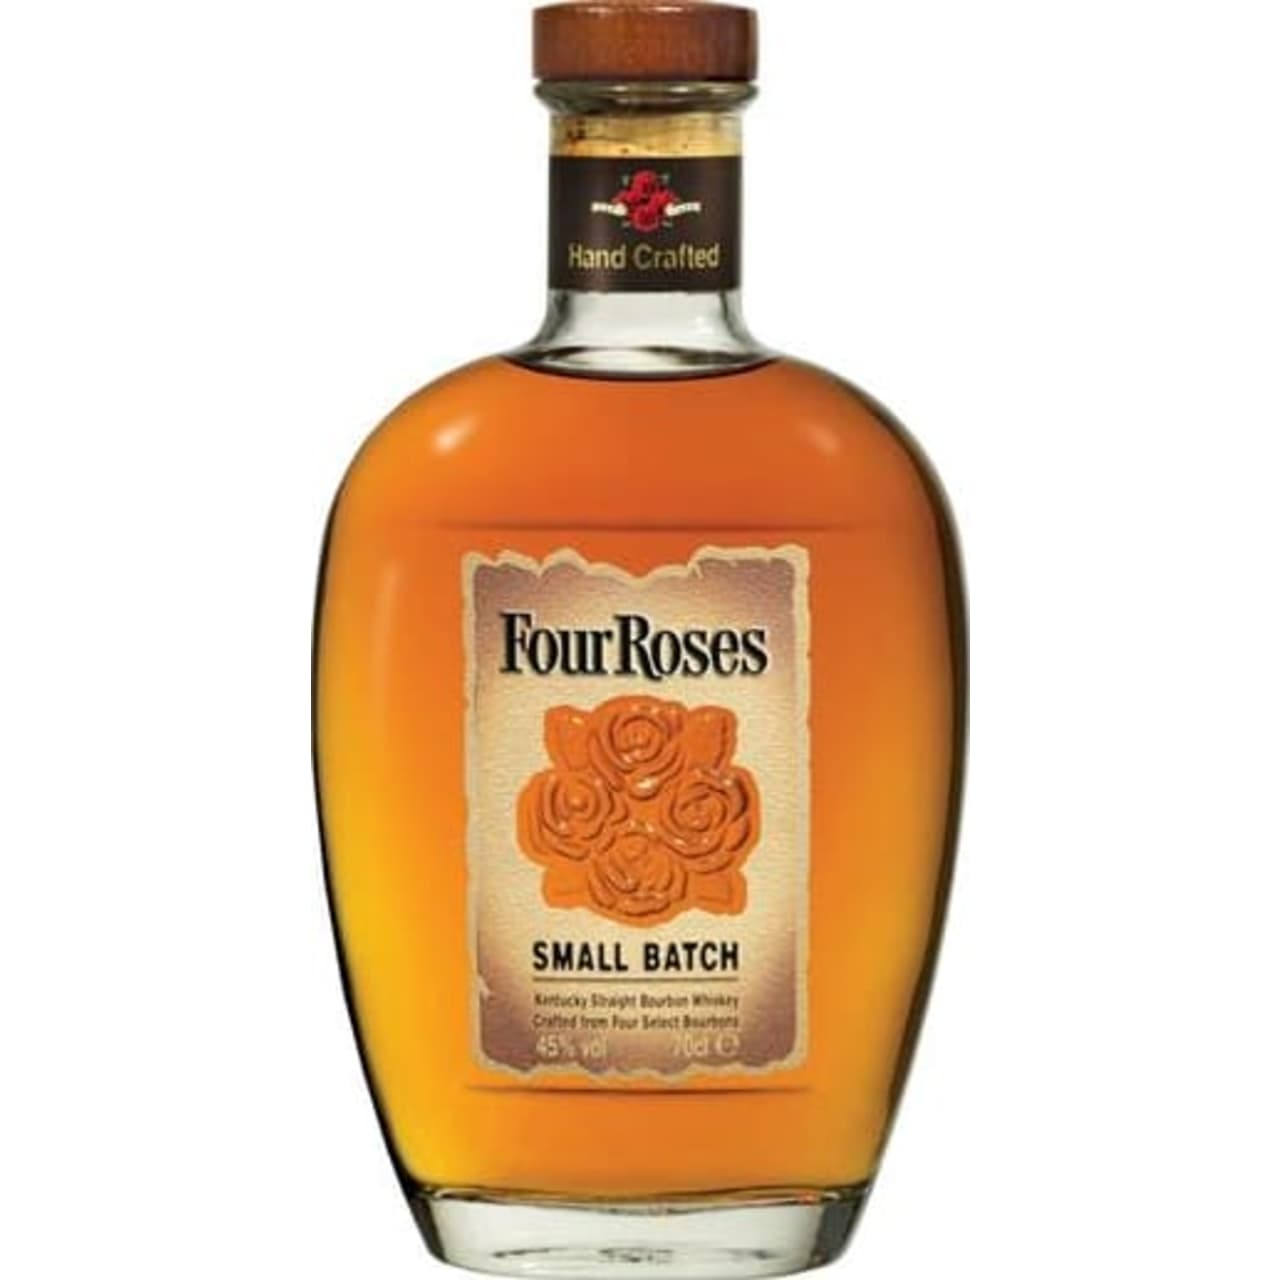 Delightfully mellow and perfectly balanced, Four Roses Small Batch Bourbon is a shining example of well-married American whiskey.